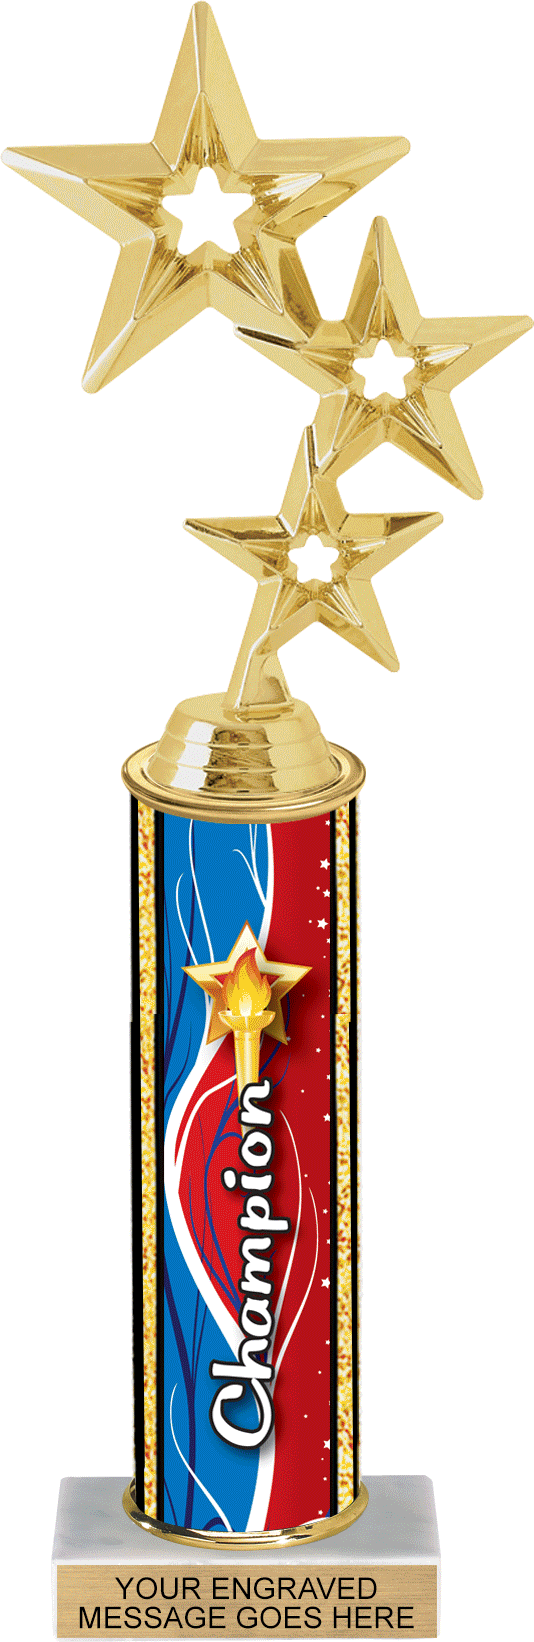 Glow in the Dark Exclusive Champion Ultra-Wave Column Trophy - 12 inch